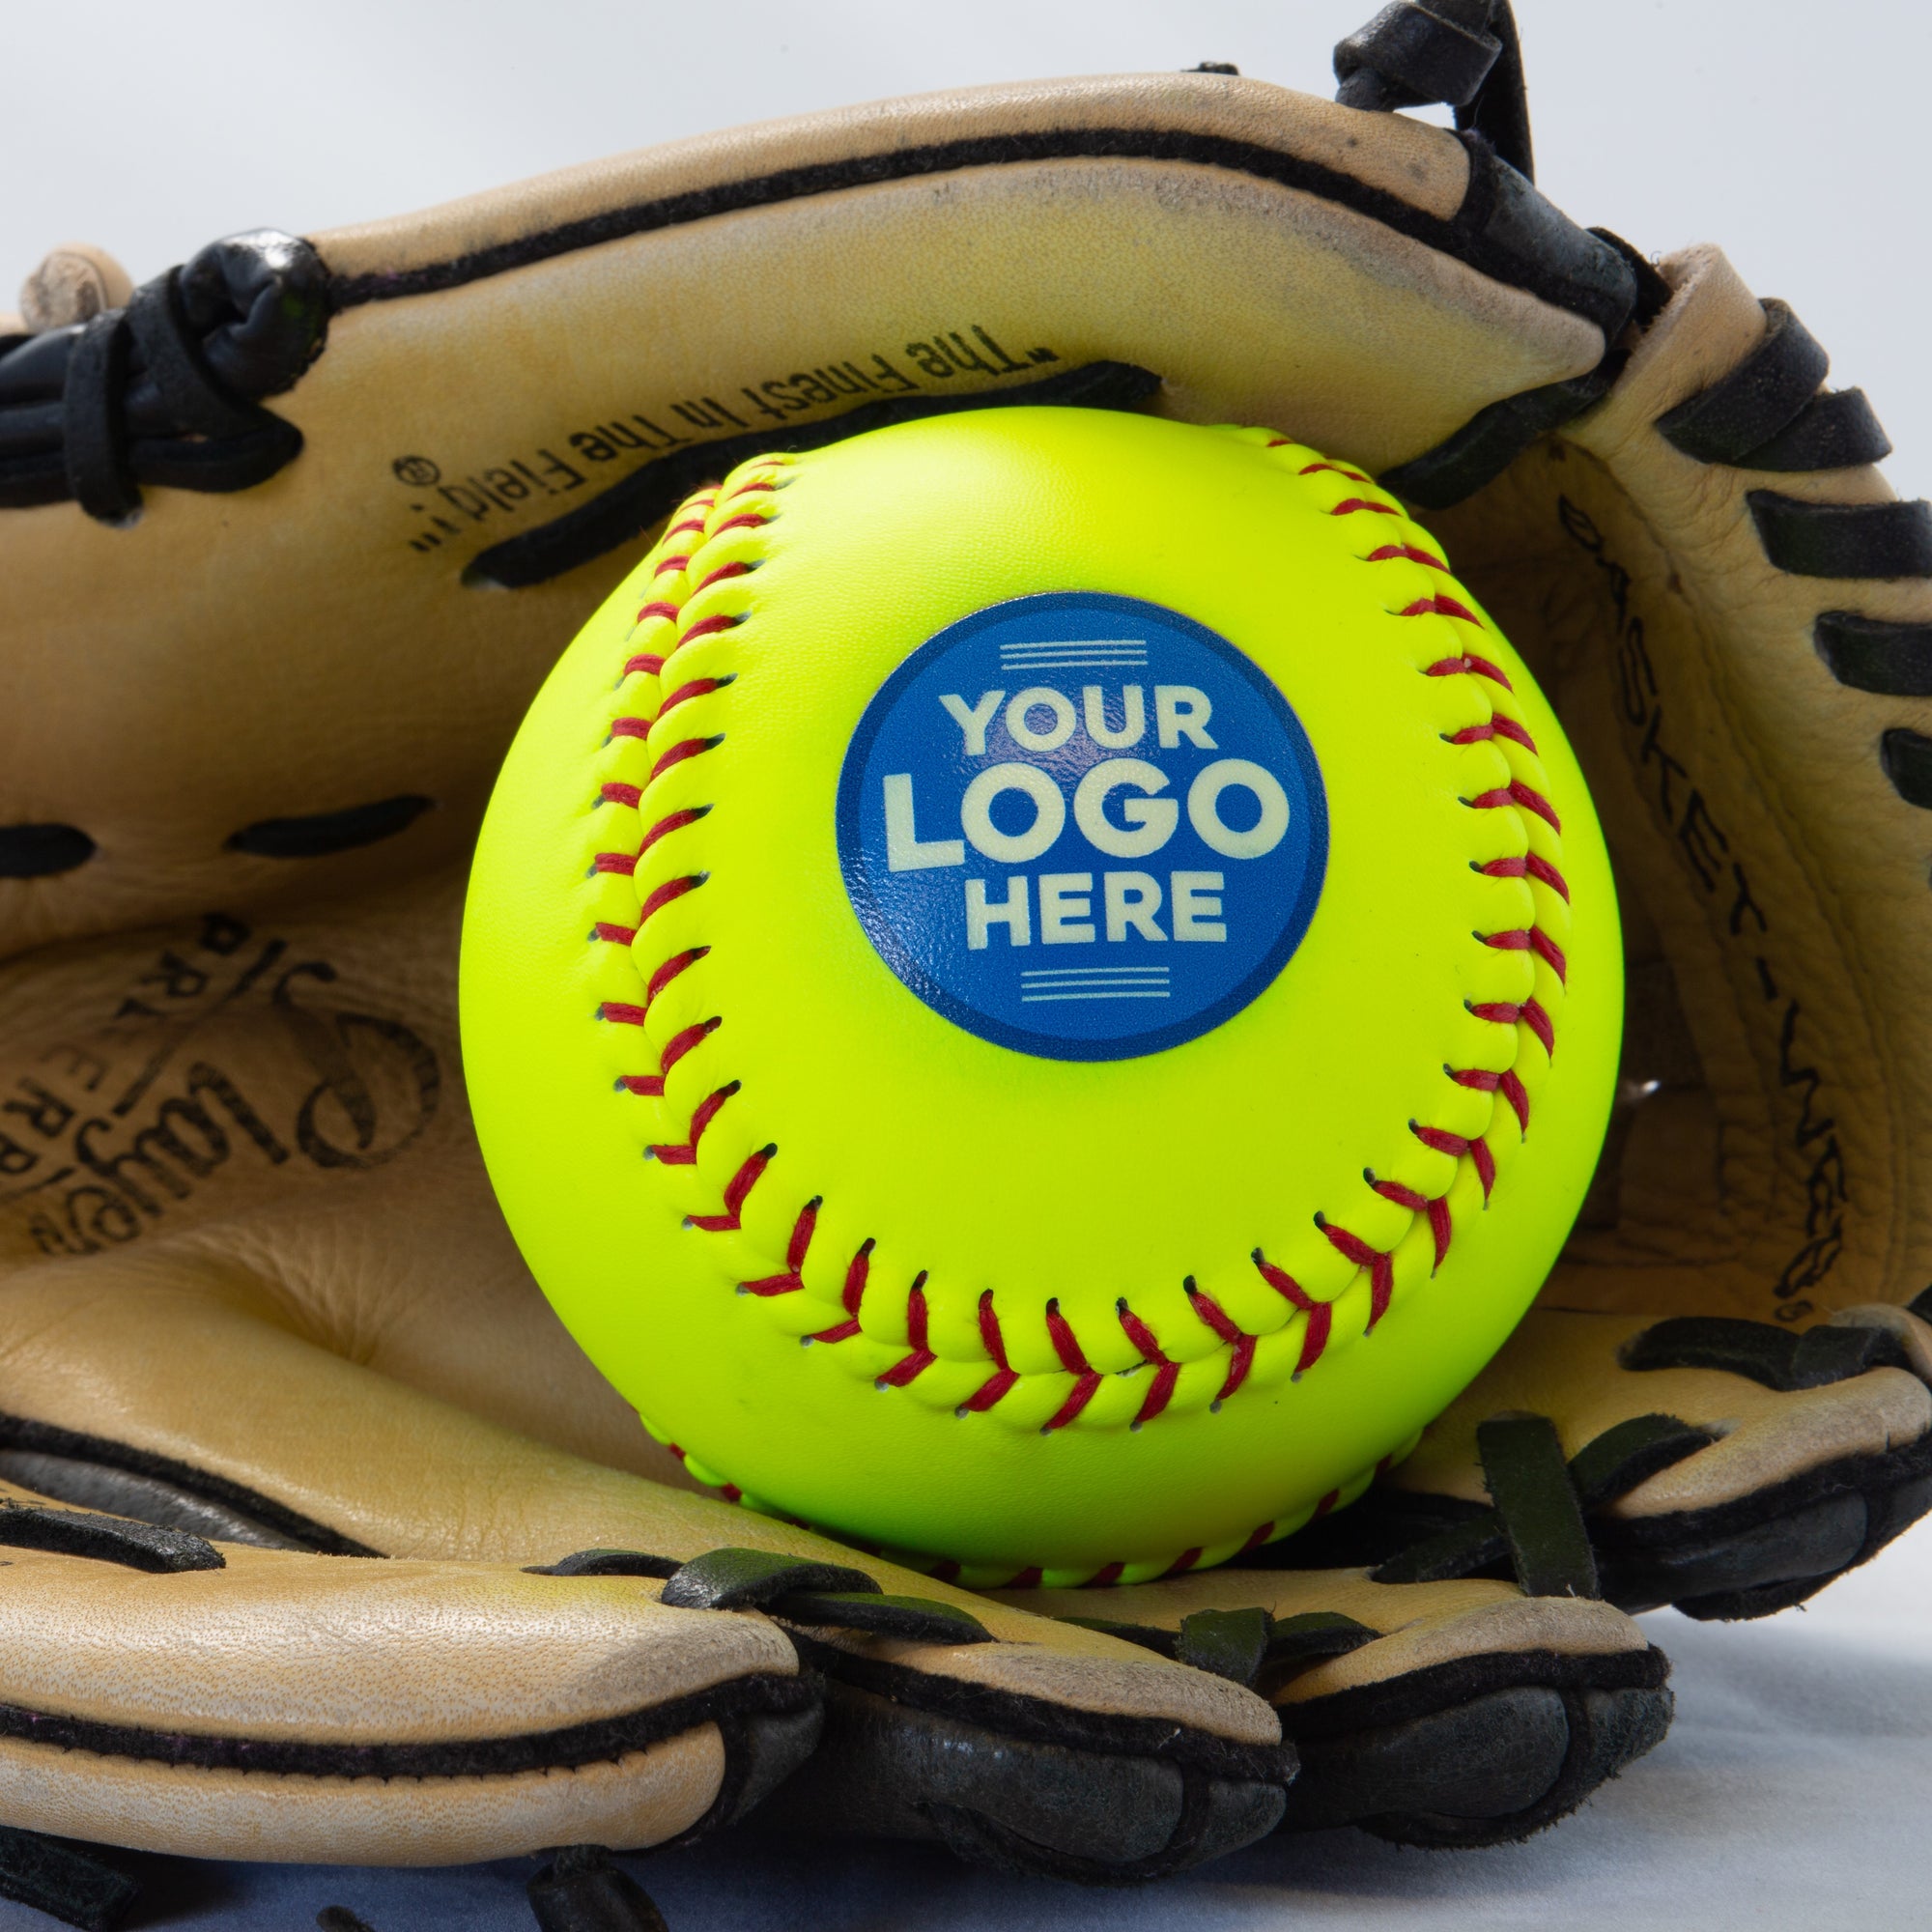 Printed Softball in Glove with Logo Design